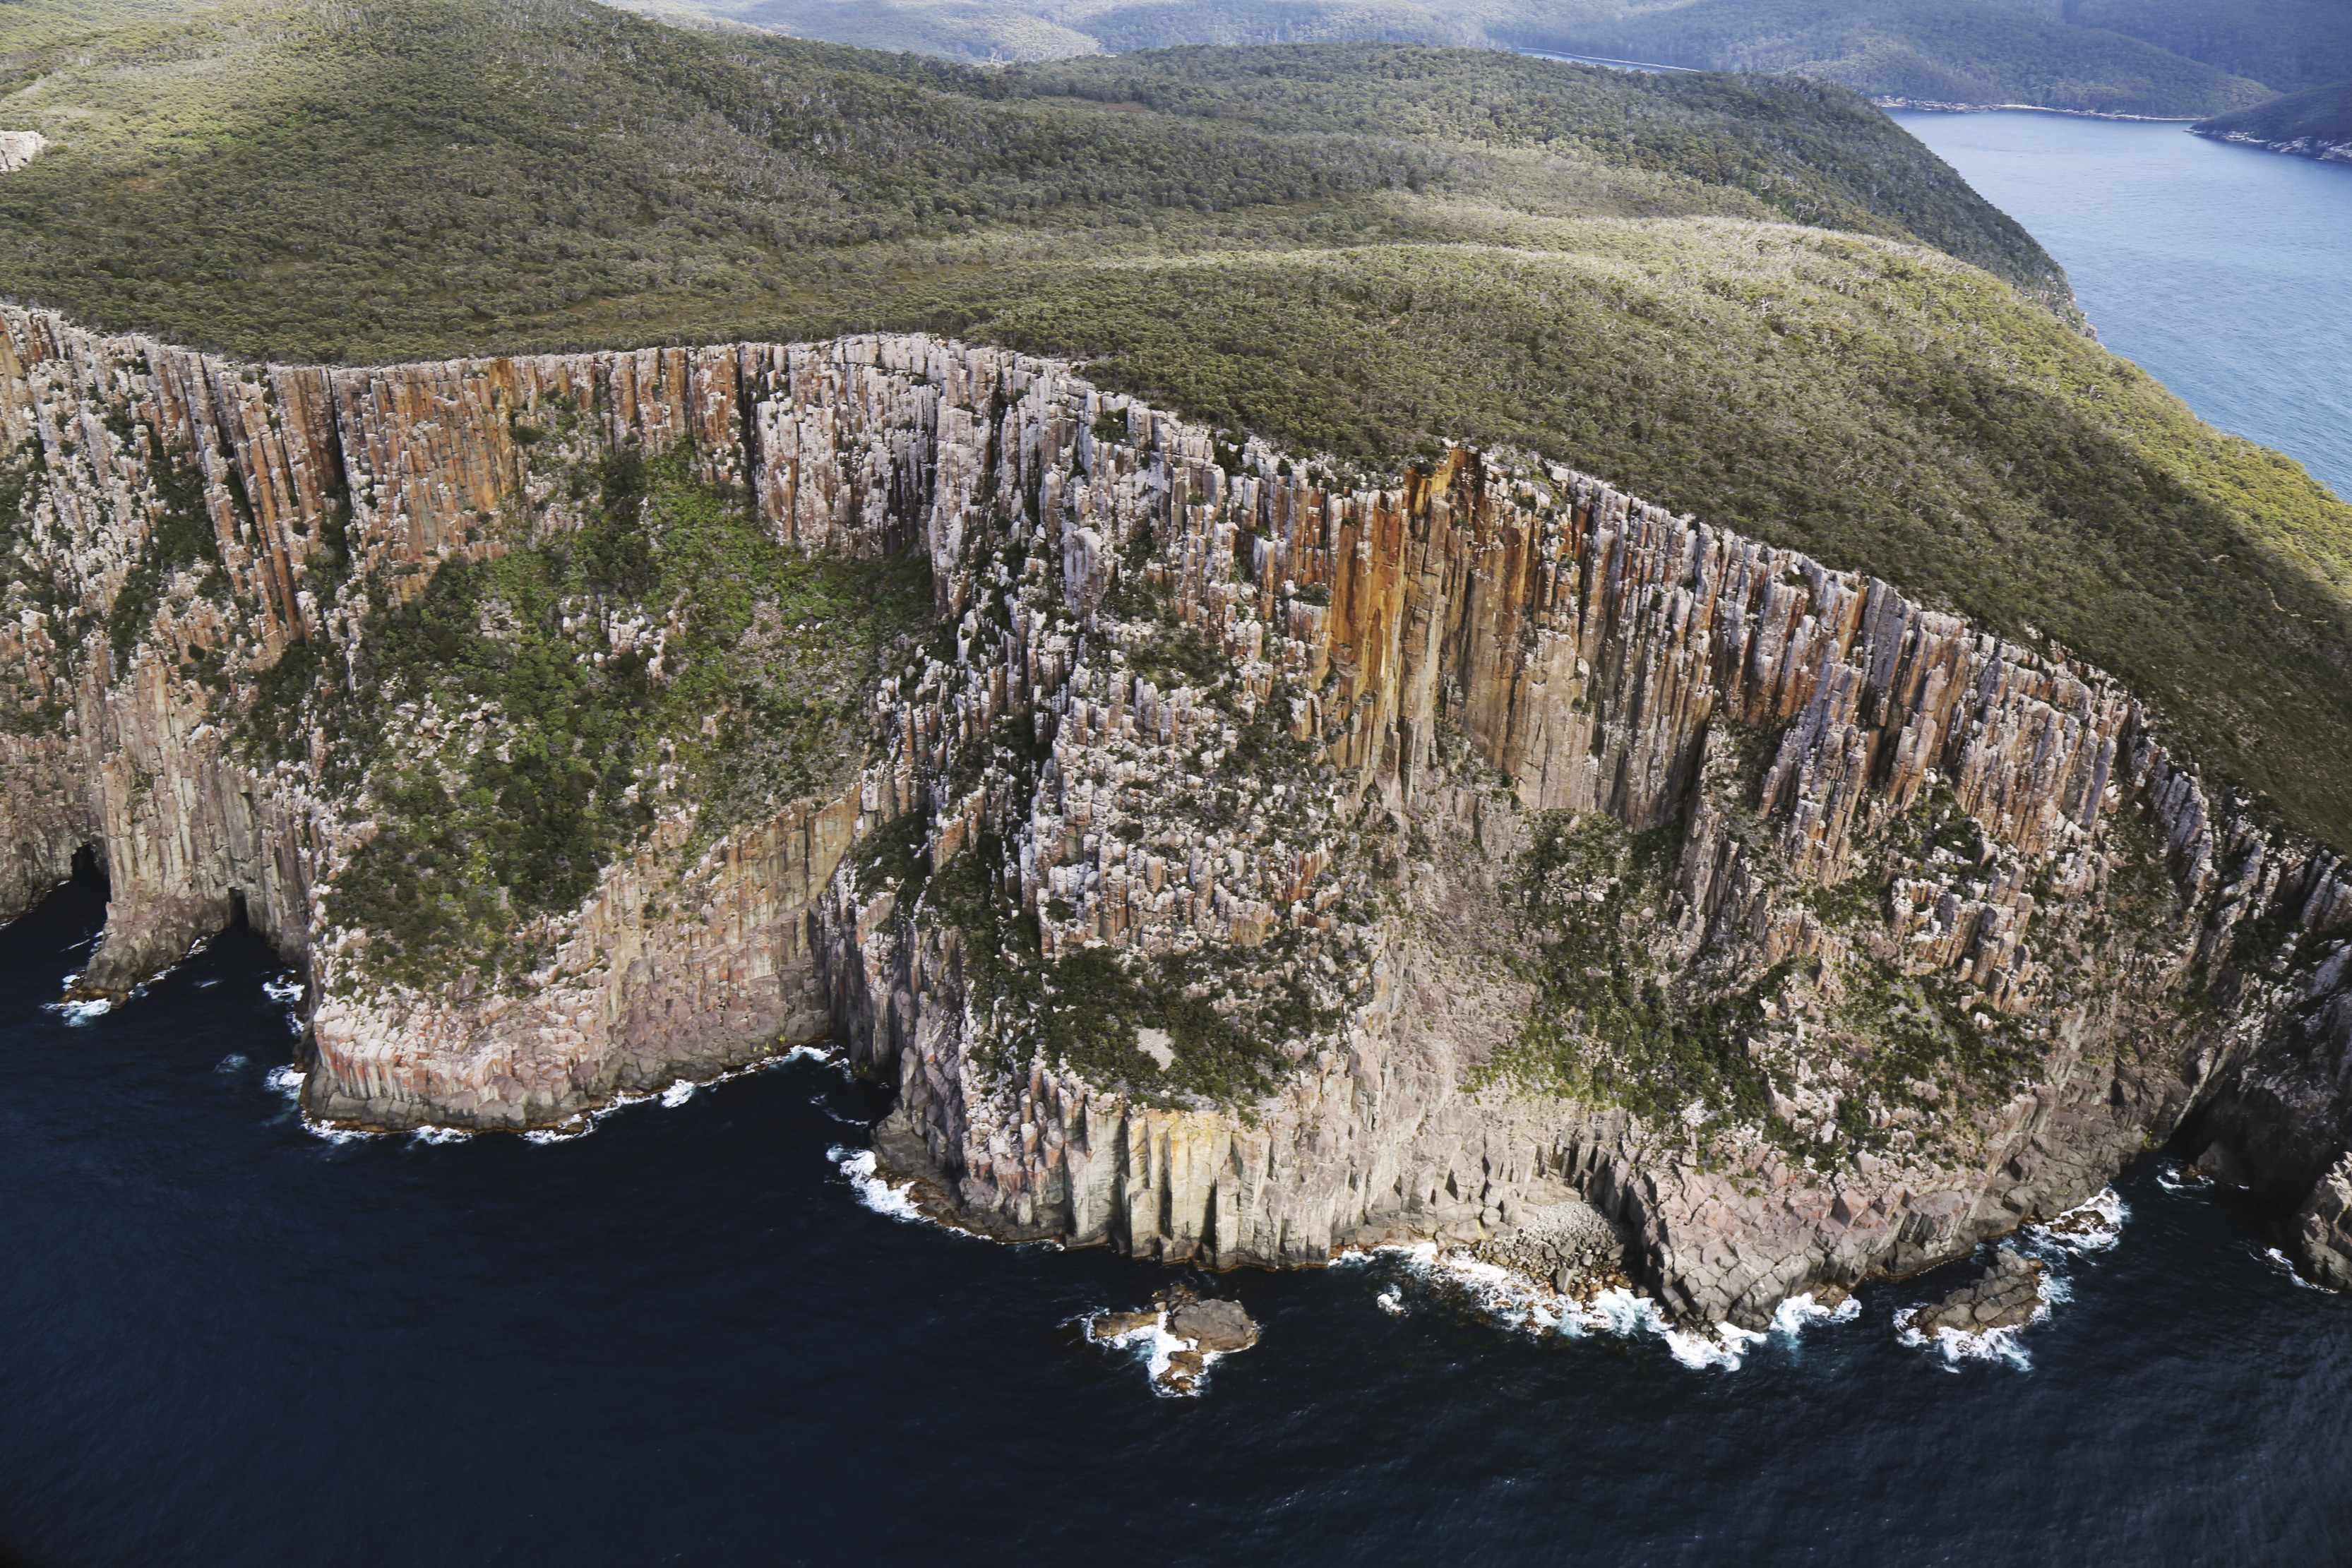 Breathtaking aerial image of the Three Capes Track - Monument Cliffs. Top covered in lush greenery with the steep the cliffs to deep blue ocean.